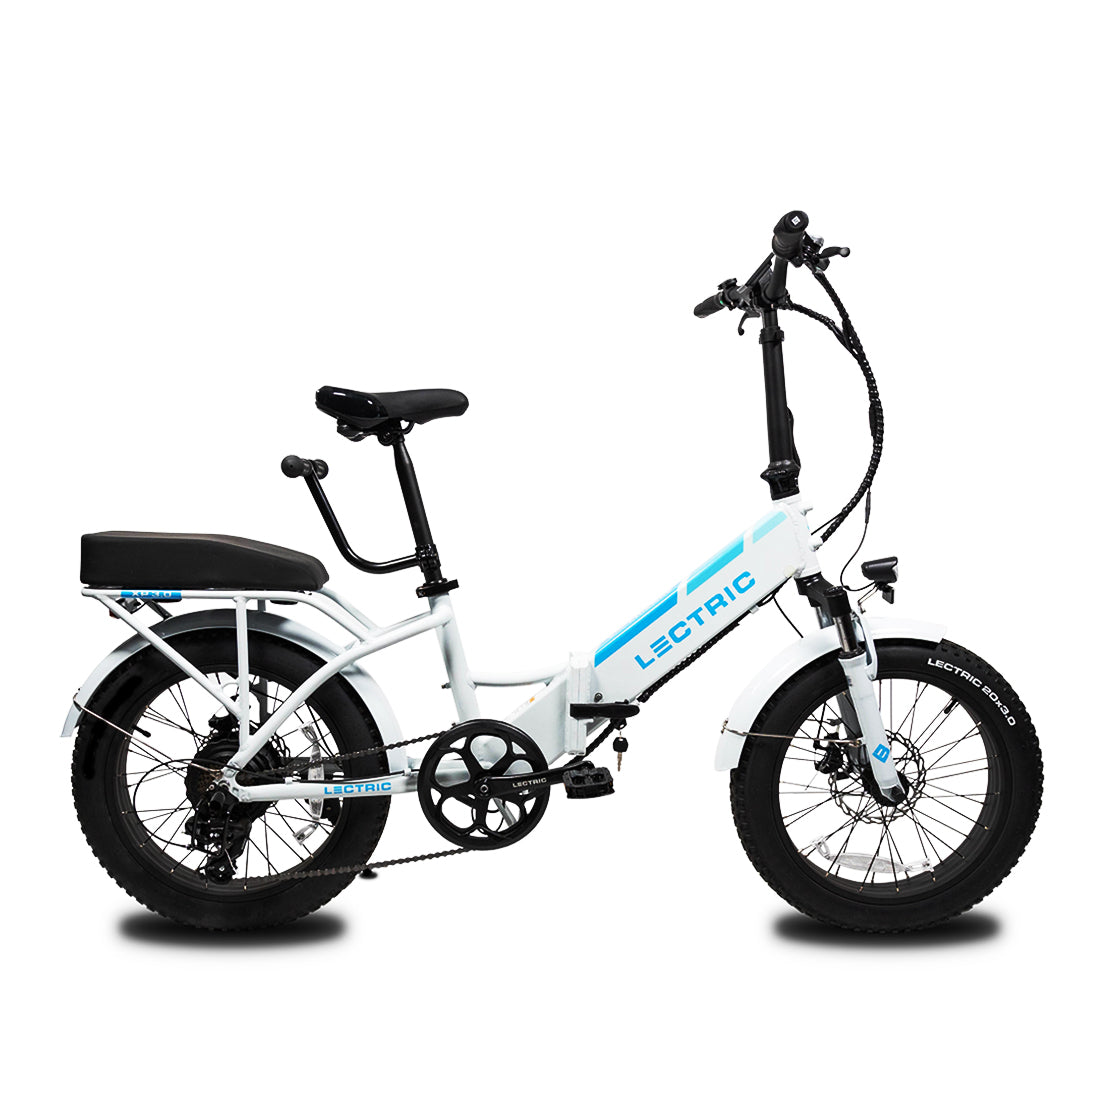 Class 3 electric bike with passenger accessories on the rear rack